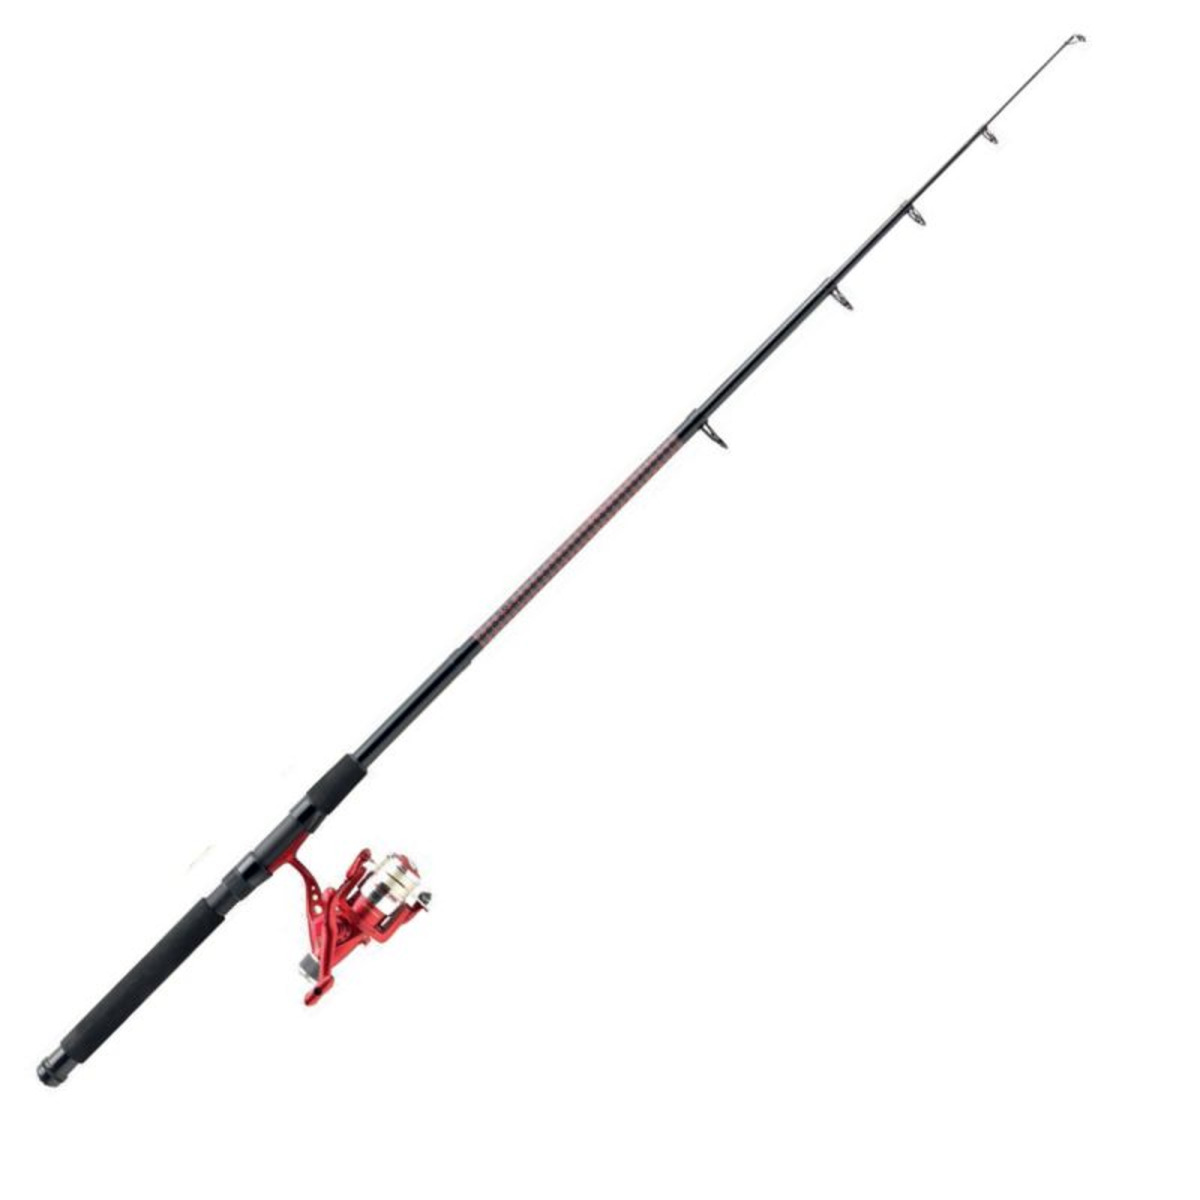 Mitchell GT Pro Spin Telescopic - 2.10 m - 7-30 g - Reel 2000 RD